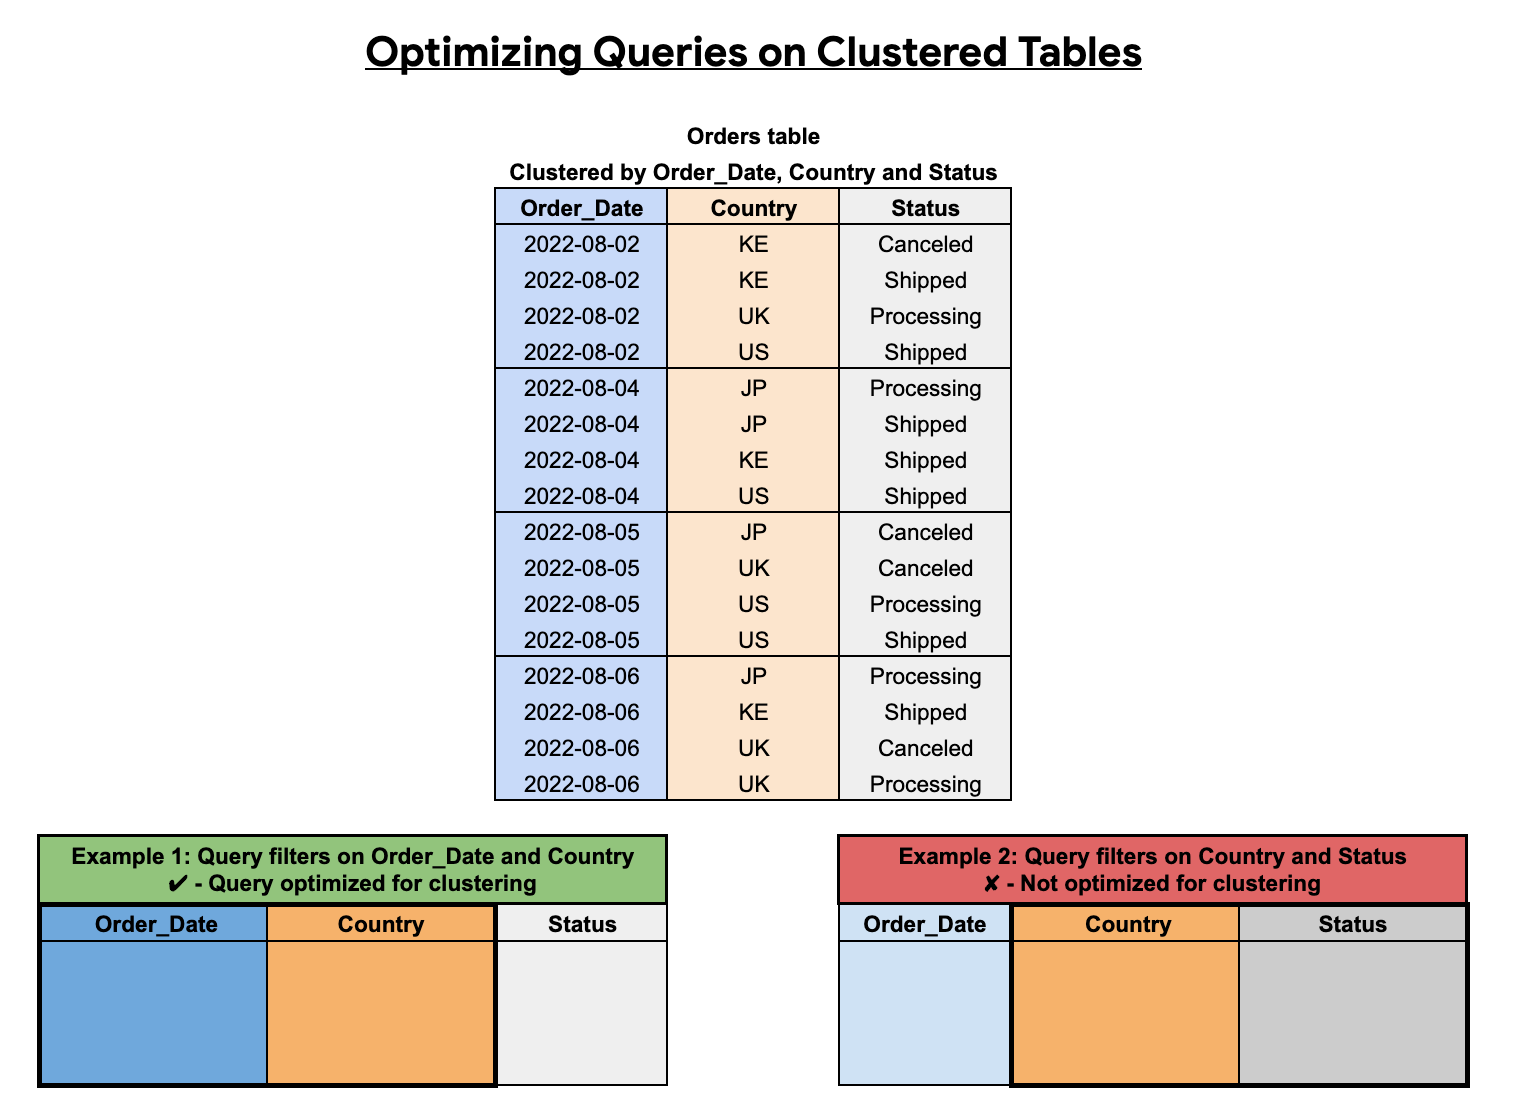 Queries on clustered tables must include clustered columns in order starting from the first.